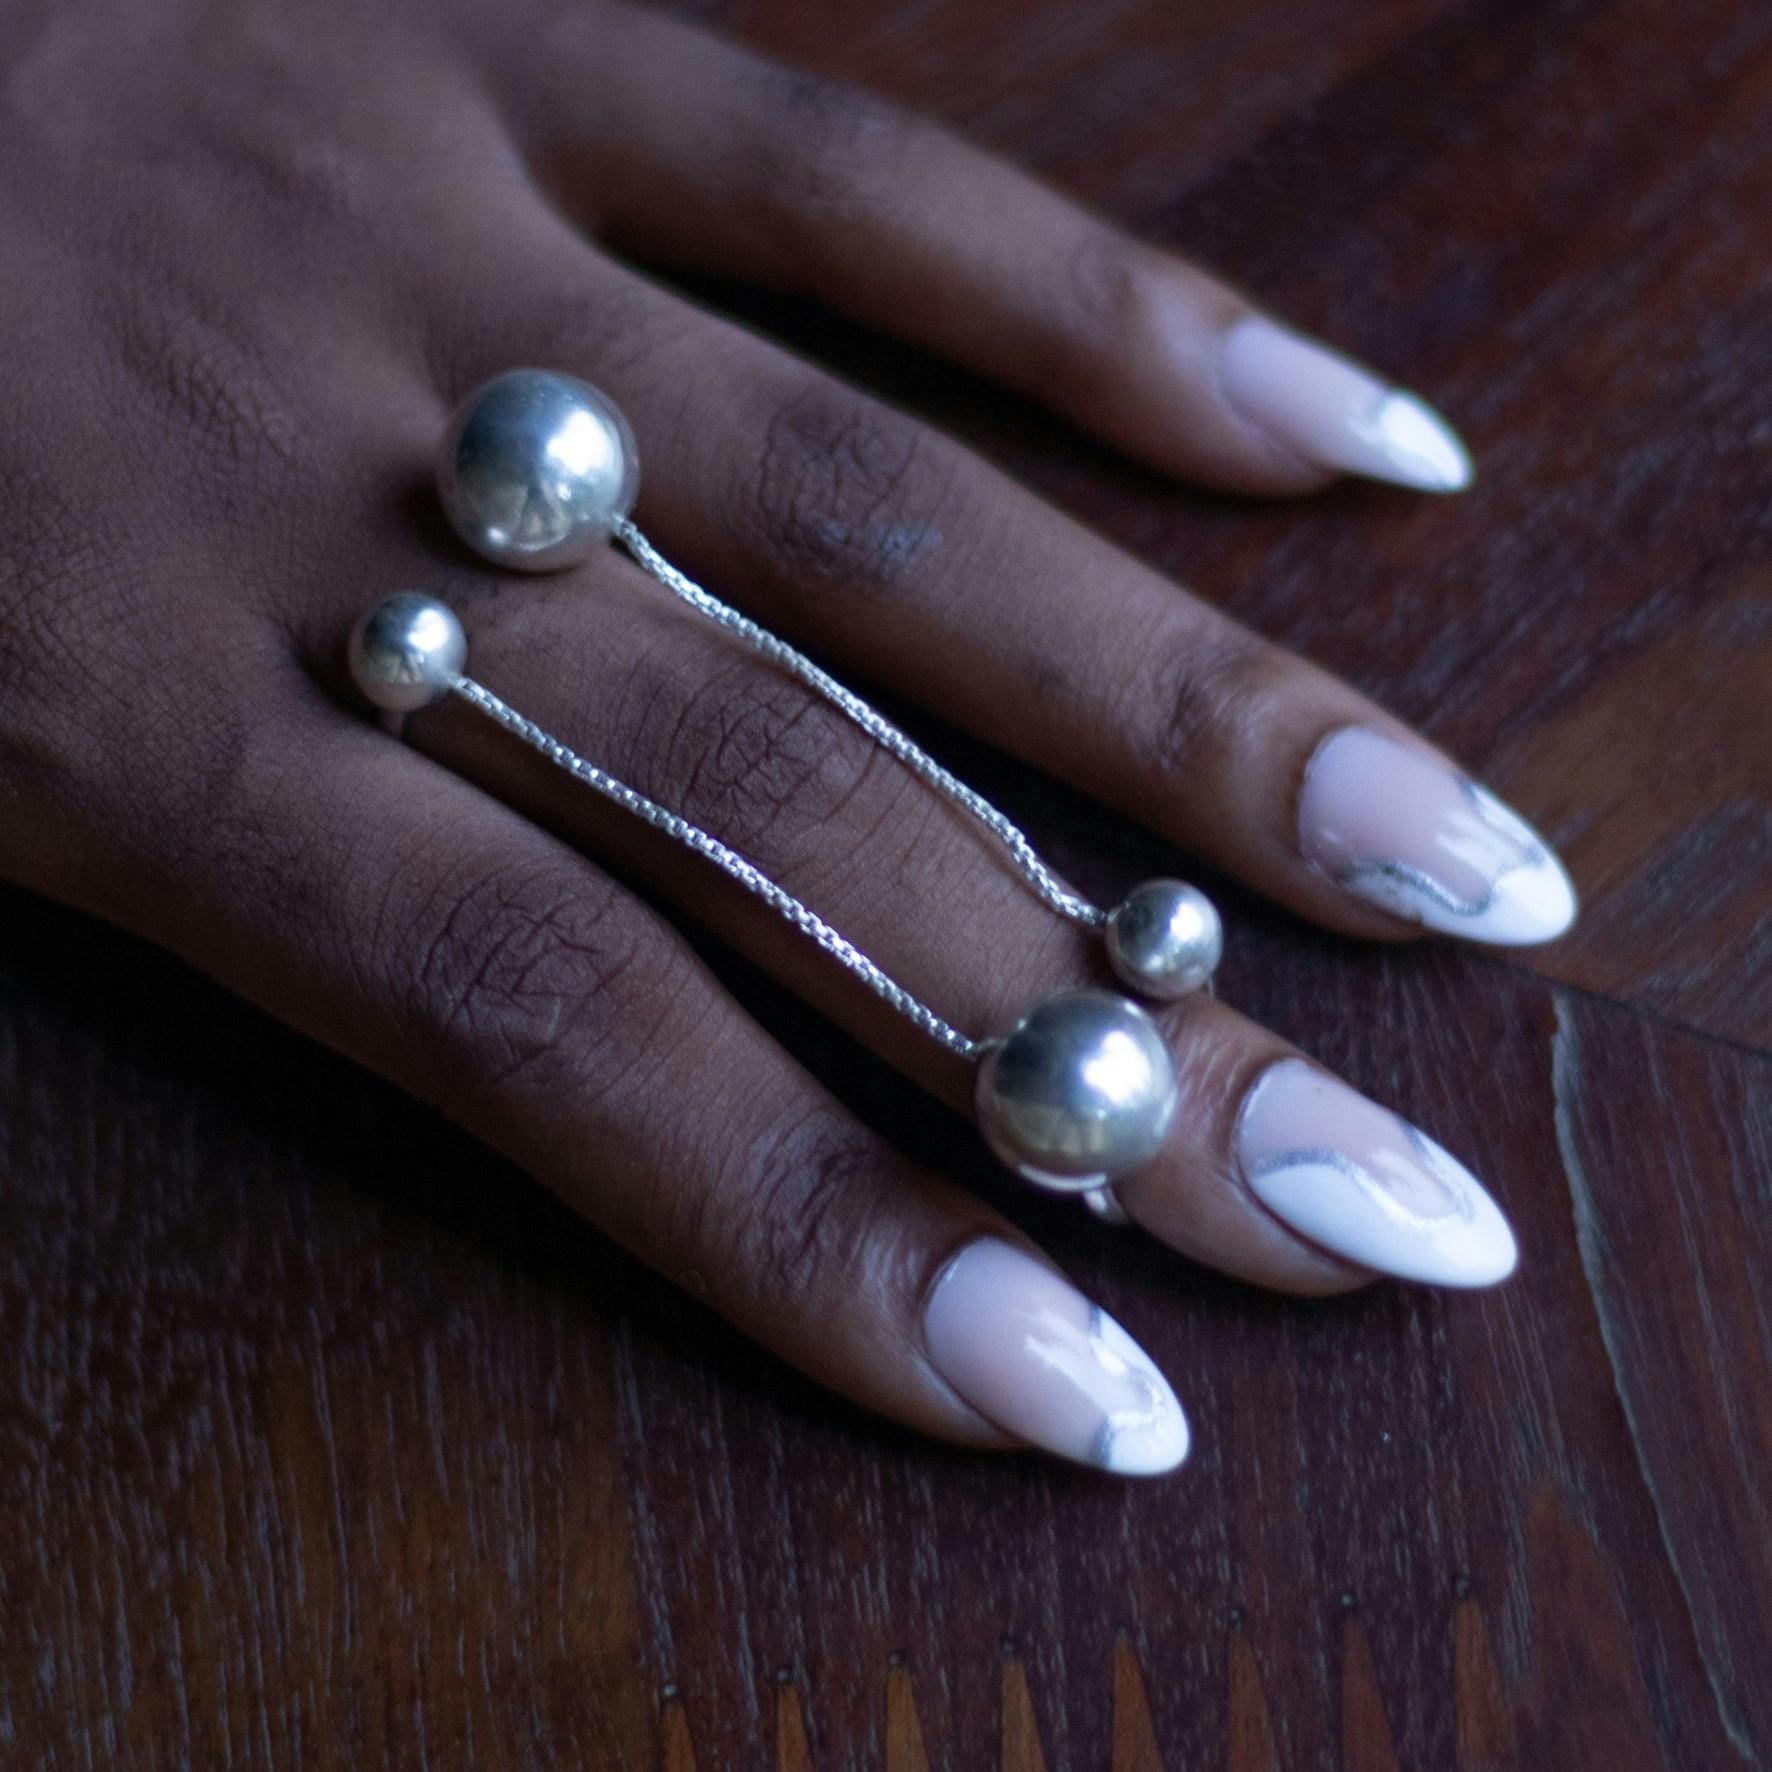 Deco Silver Chain Ring Maxi, a product by Baka